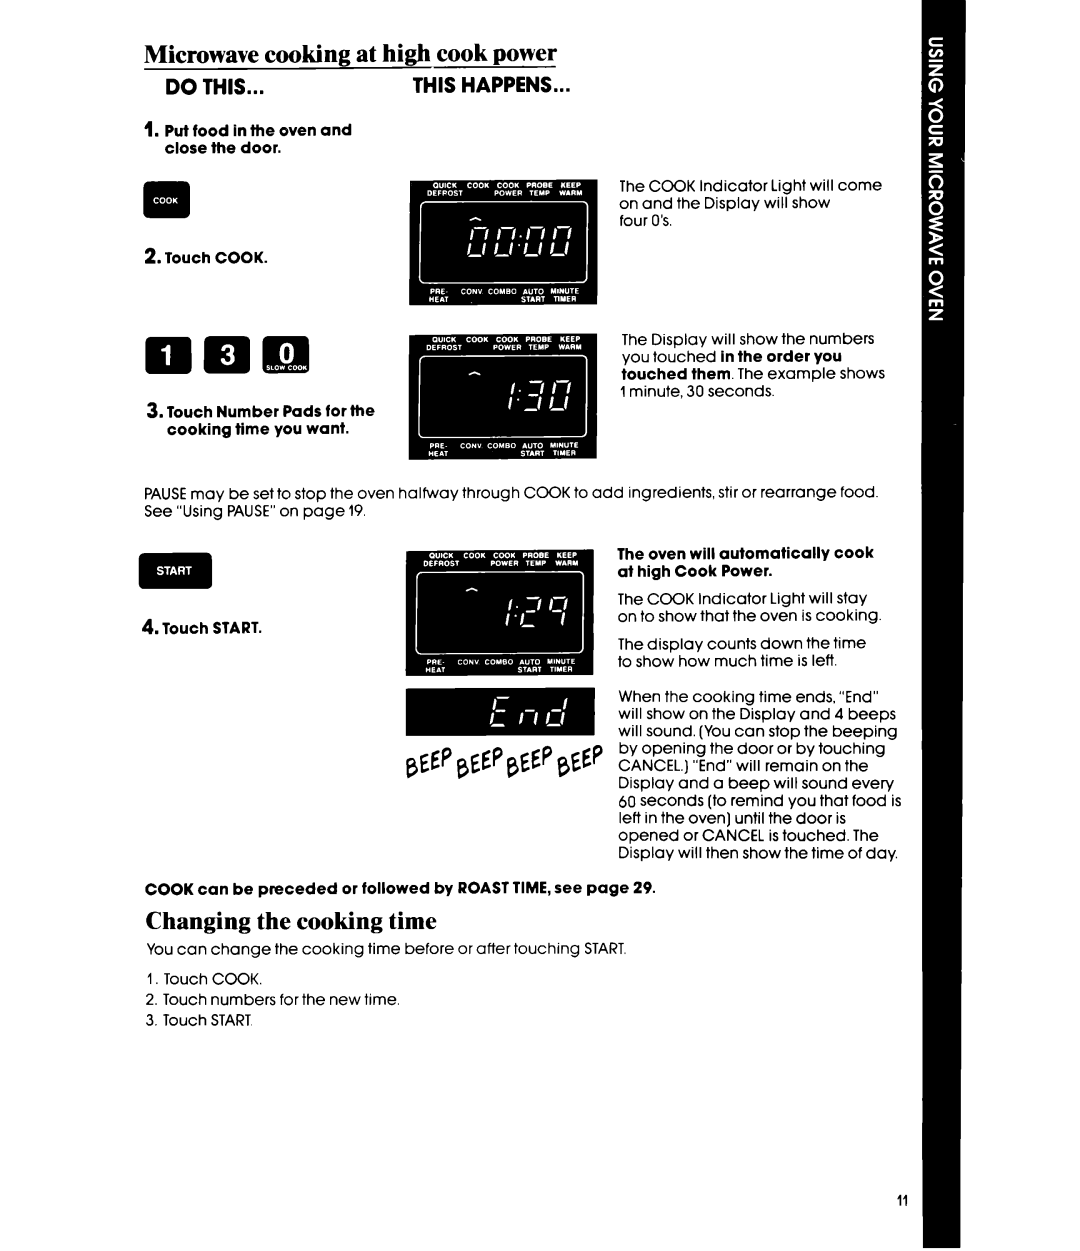 Whirlpool MC8990XT, MC8991XT manual Microwave cooking at high cook power, Changing the cooking time, Do This, This Happens 